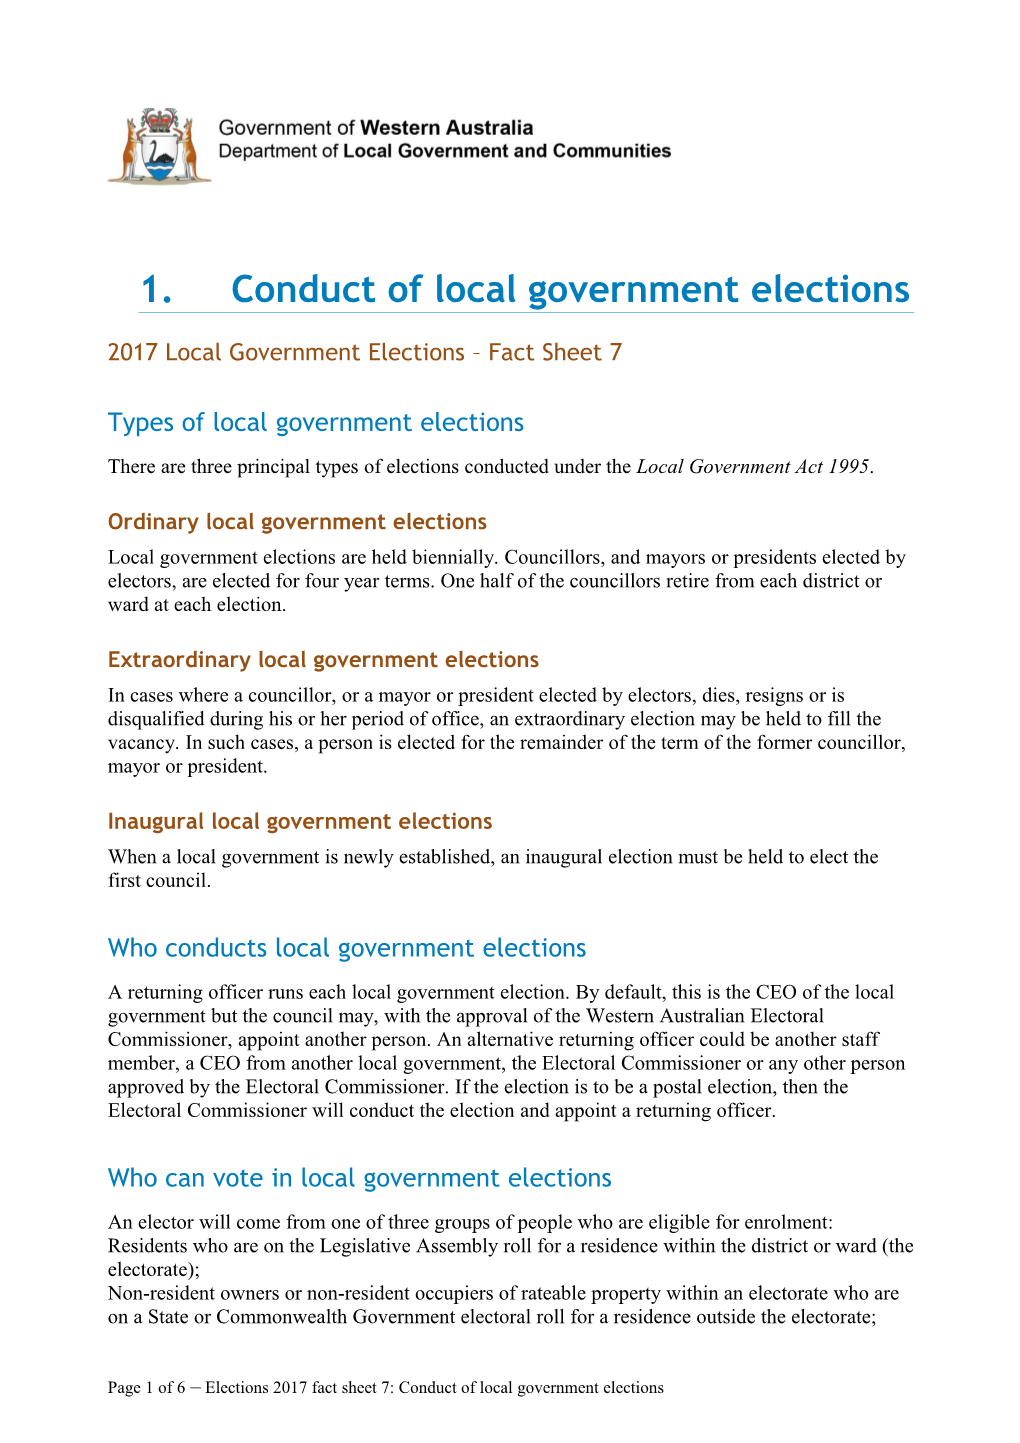 Fact Sheet 07 - Conduct of Local Government Elections